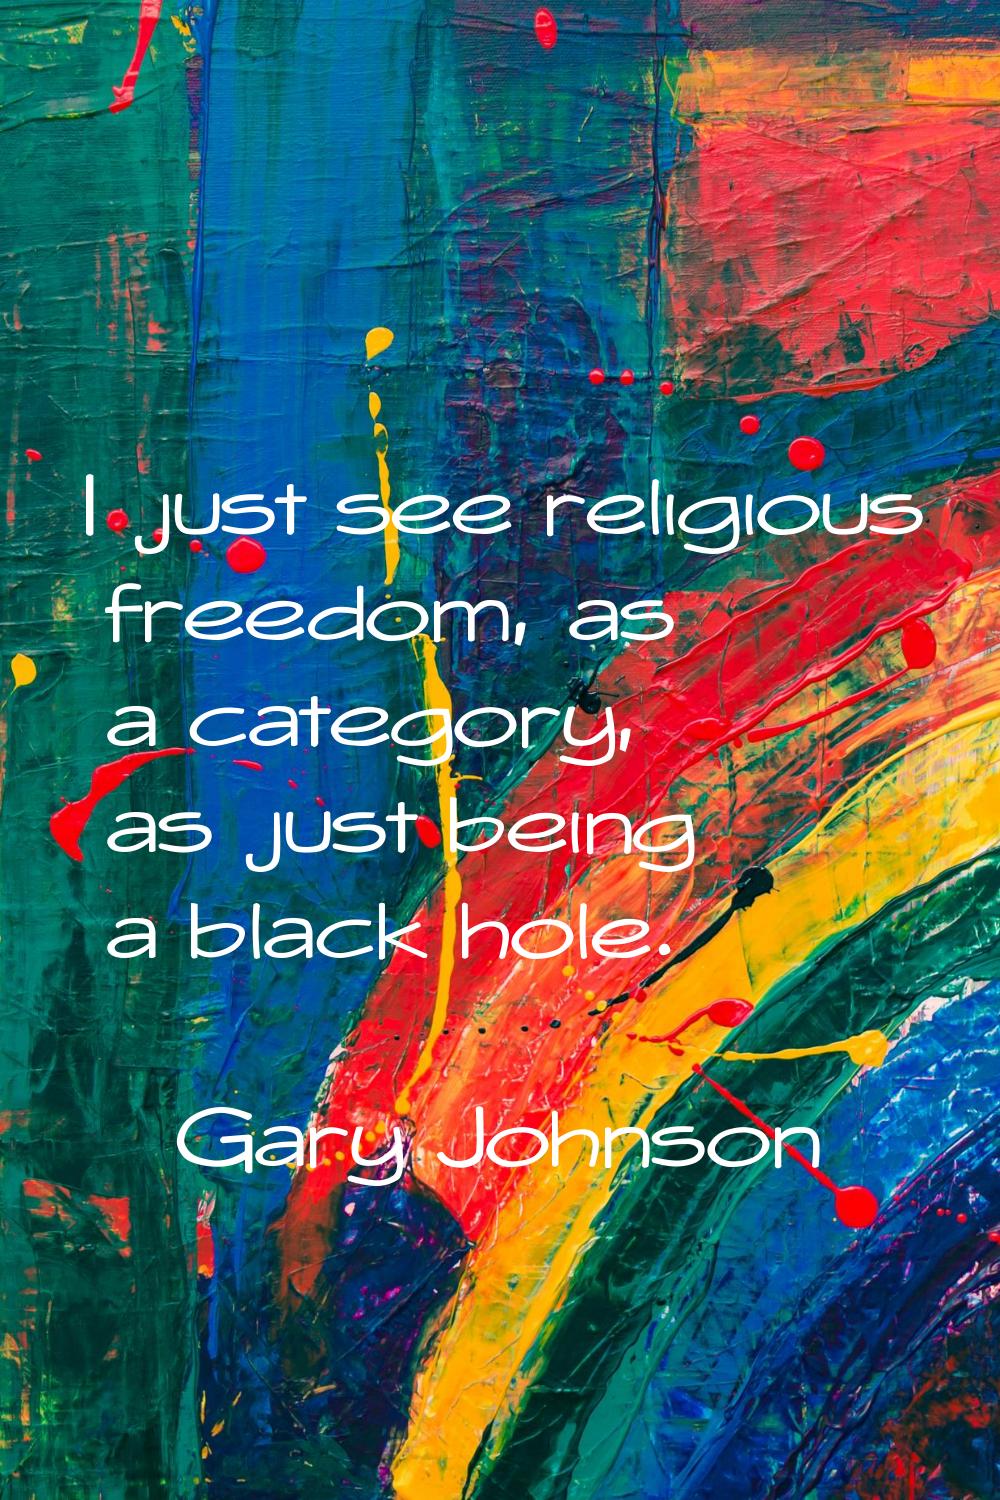 I just see religious freedom, as a category, as just being a black hole.